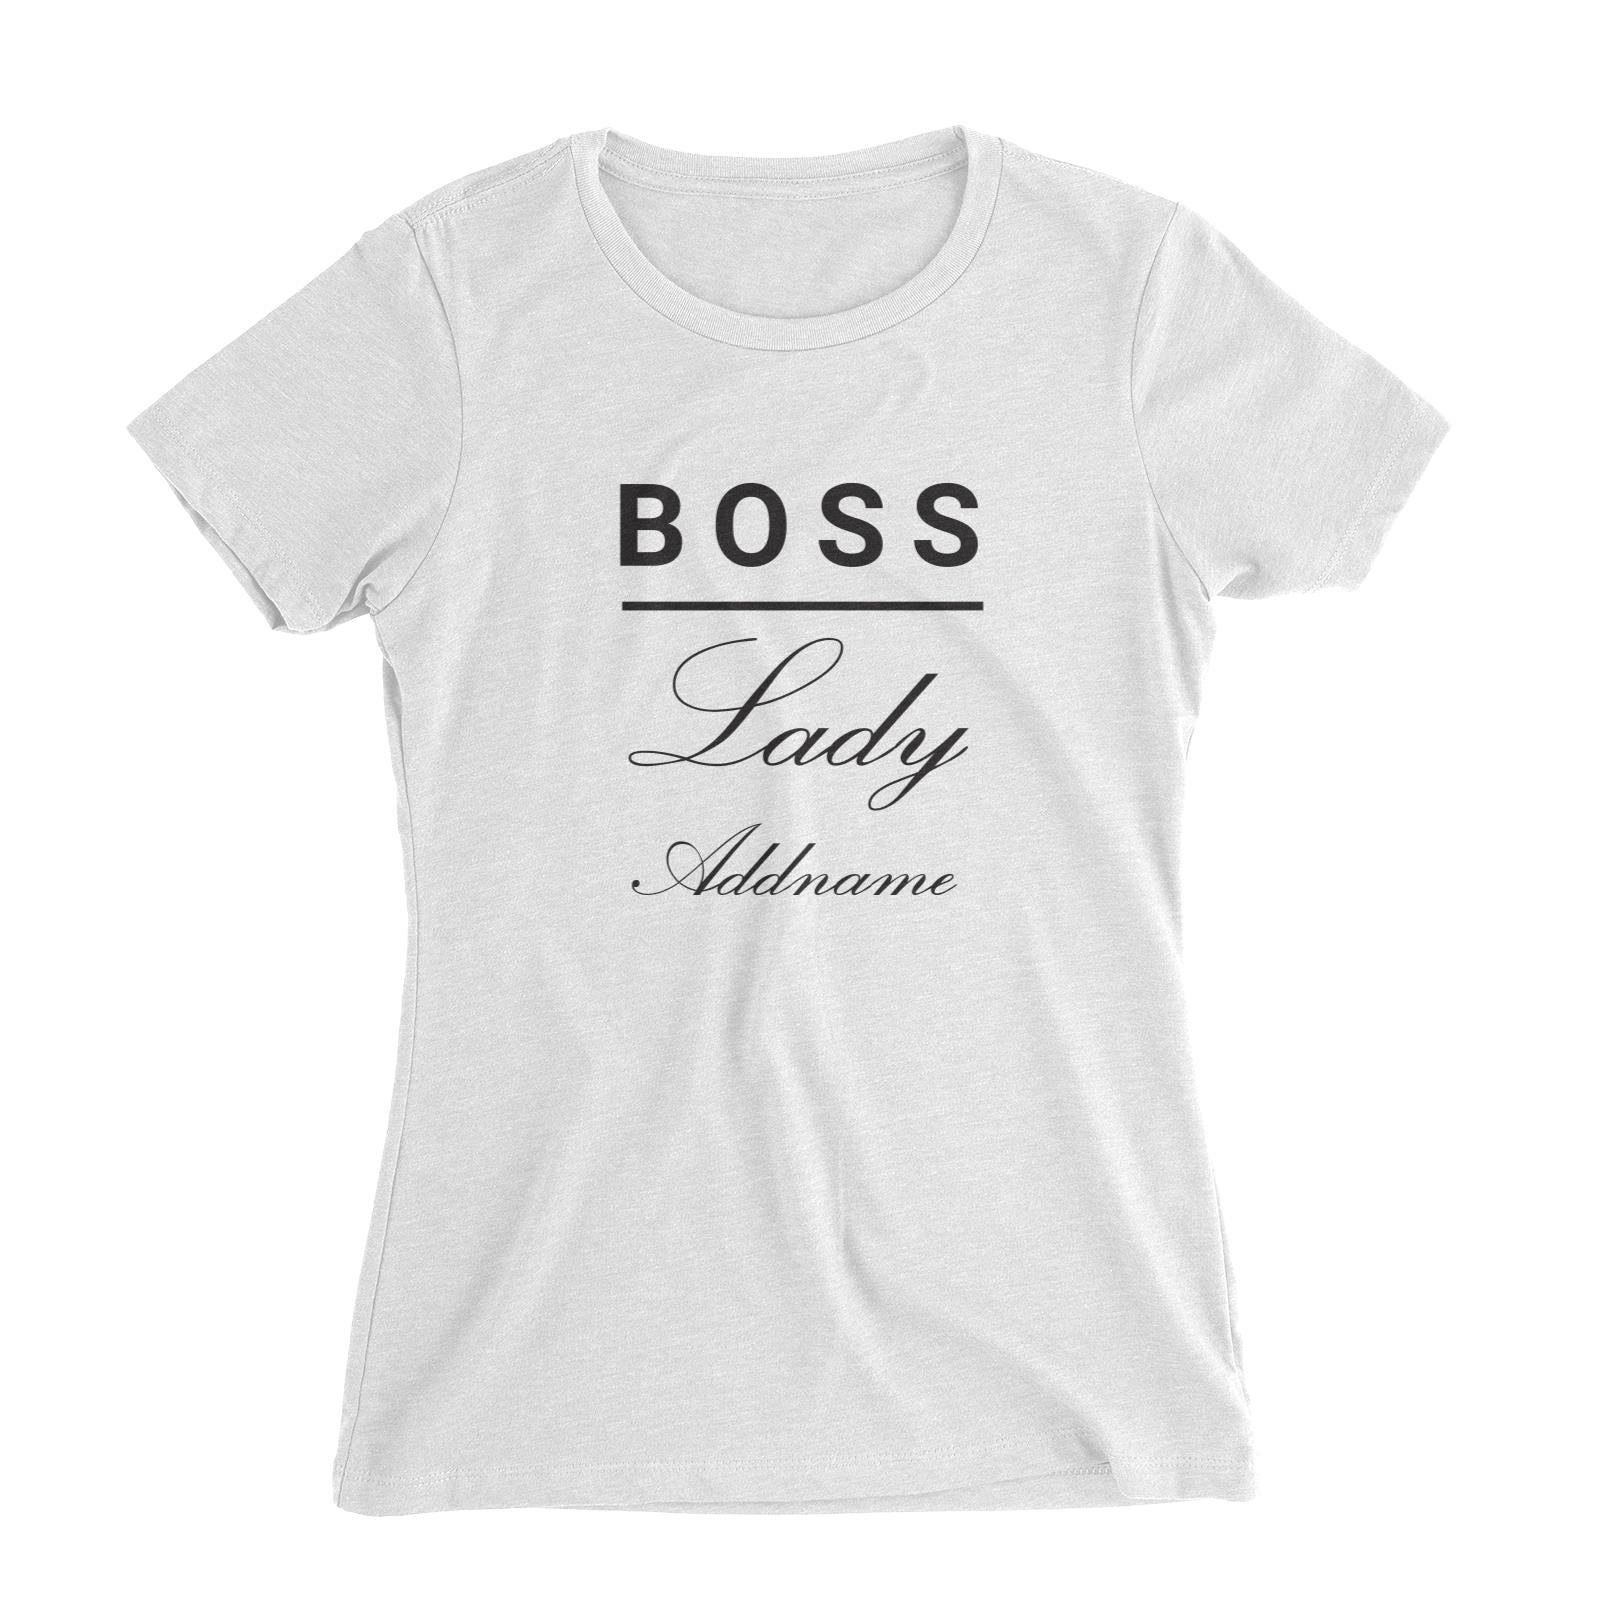 Boss Lady Addname Women's Slim Fit T-Shirt  Matching Family Personalizable Designs